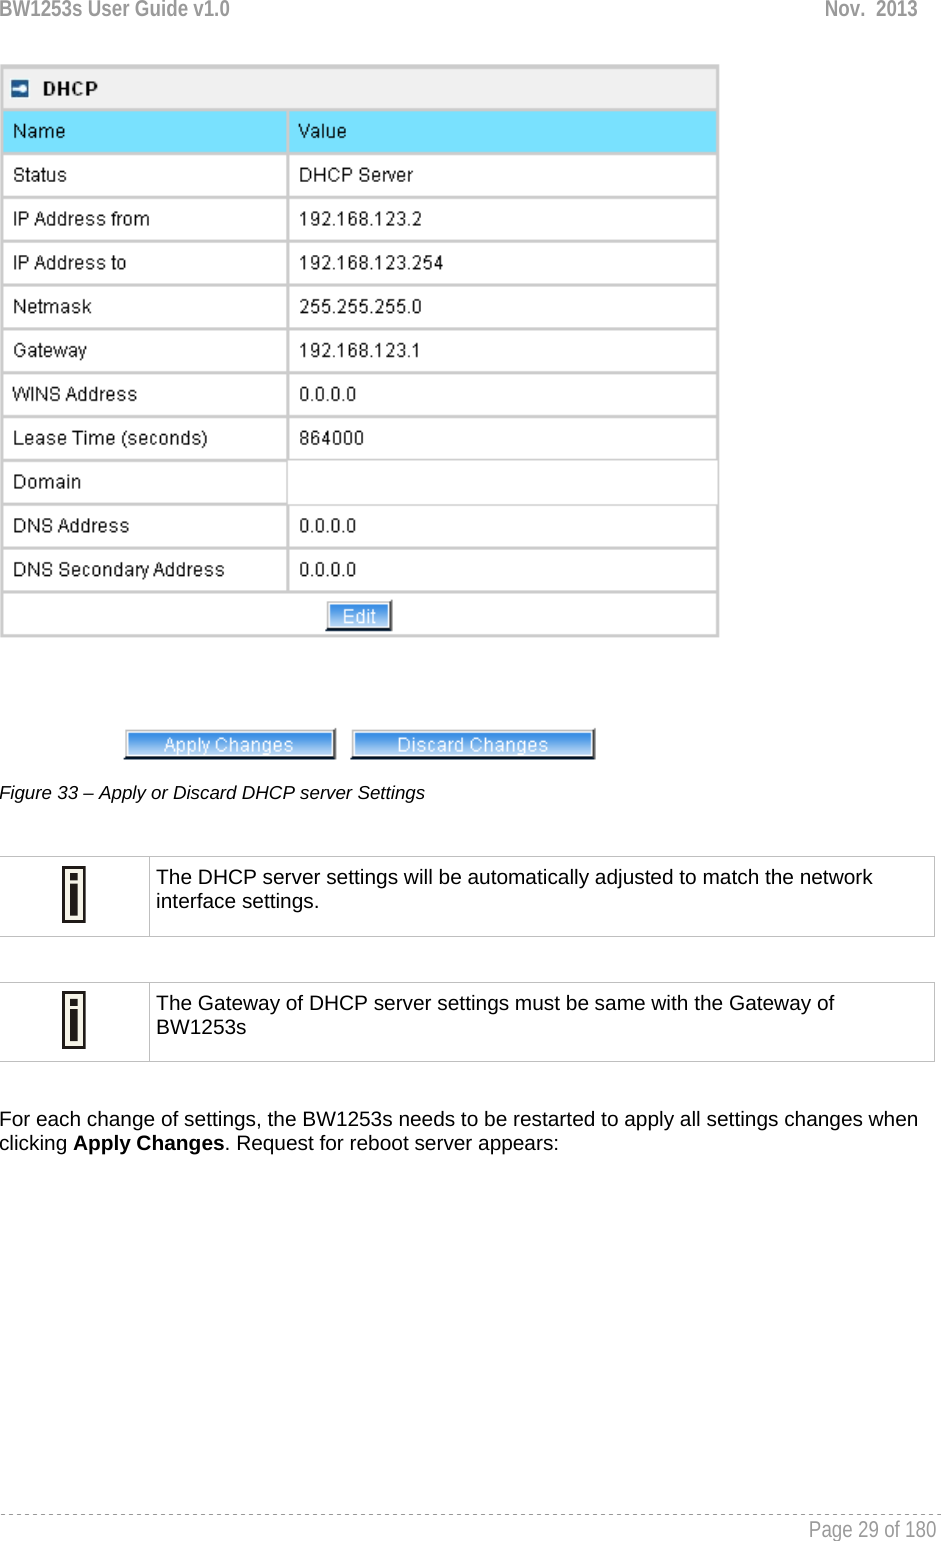 BW1253s User Guide v1.0  Nov.  2013     Page 29 of 180    Figure 33 – Apply or Discard DHCP server Settings   The DHCP server settings will be automatically adjusted to match the network interface settings.   The Gateway of DHCP server settings must be same with the Gateway of BW1253s  For each change of settings, the BW1253s needs to be restarted to apply all settings changes when clicking Apply Changes. Request for reboot server appears: 